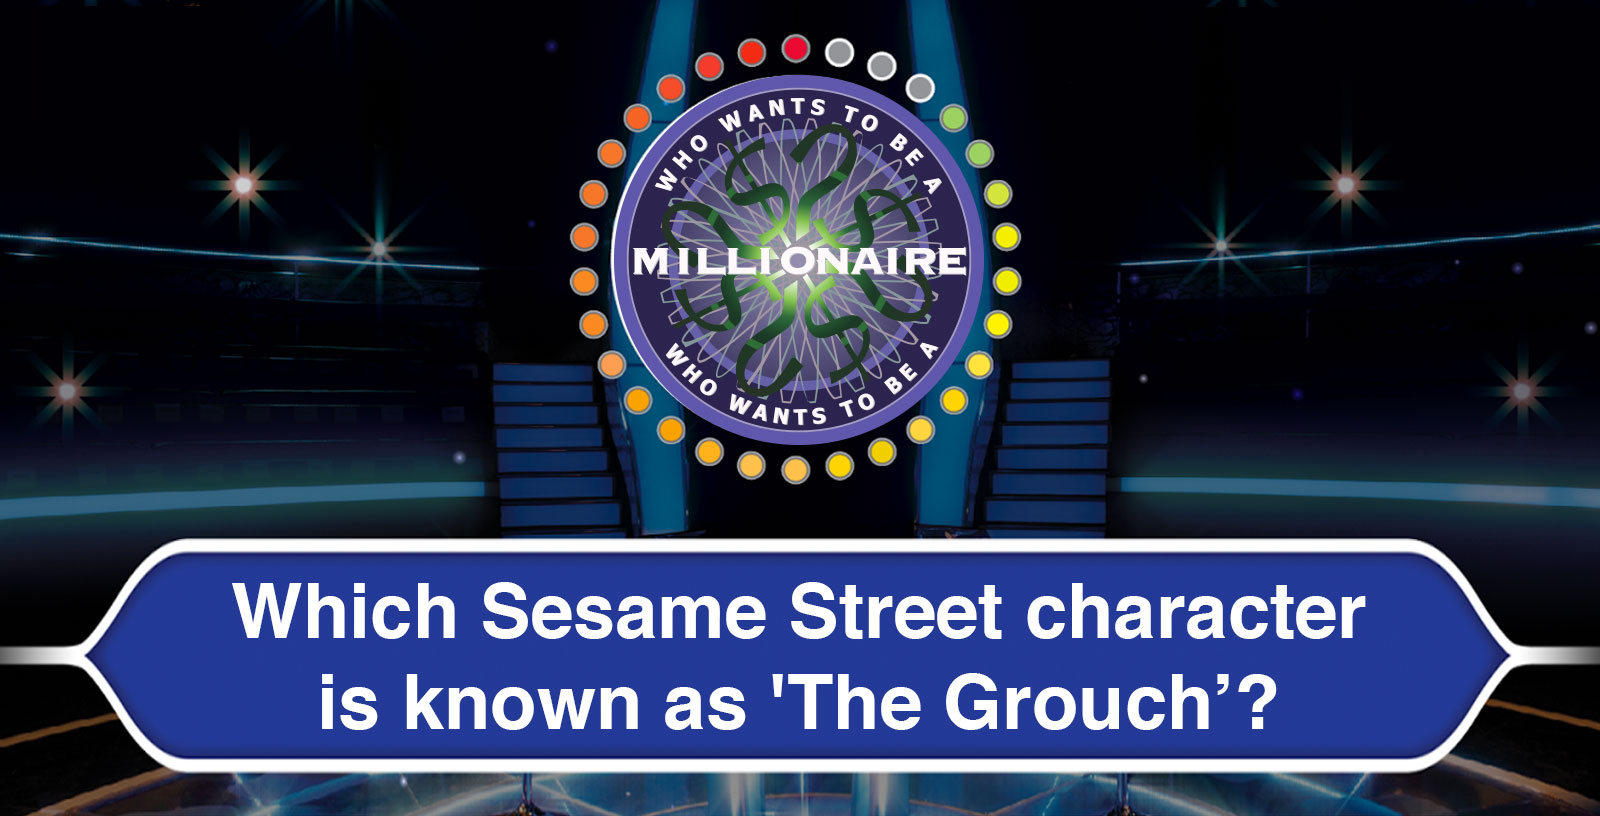 who wants to be a millionaire movie trivia